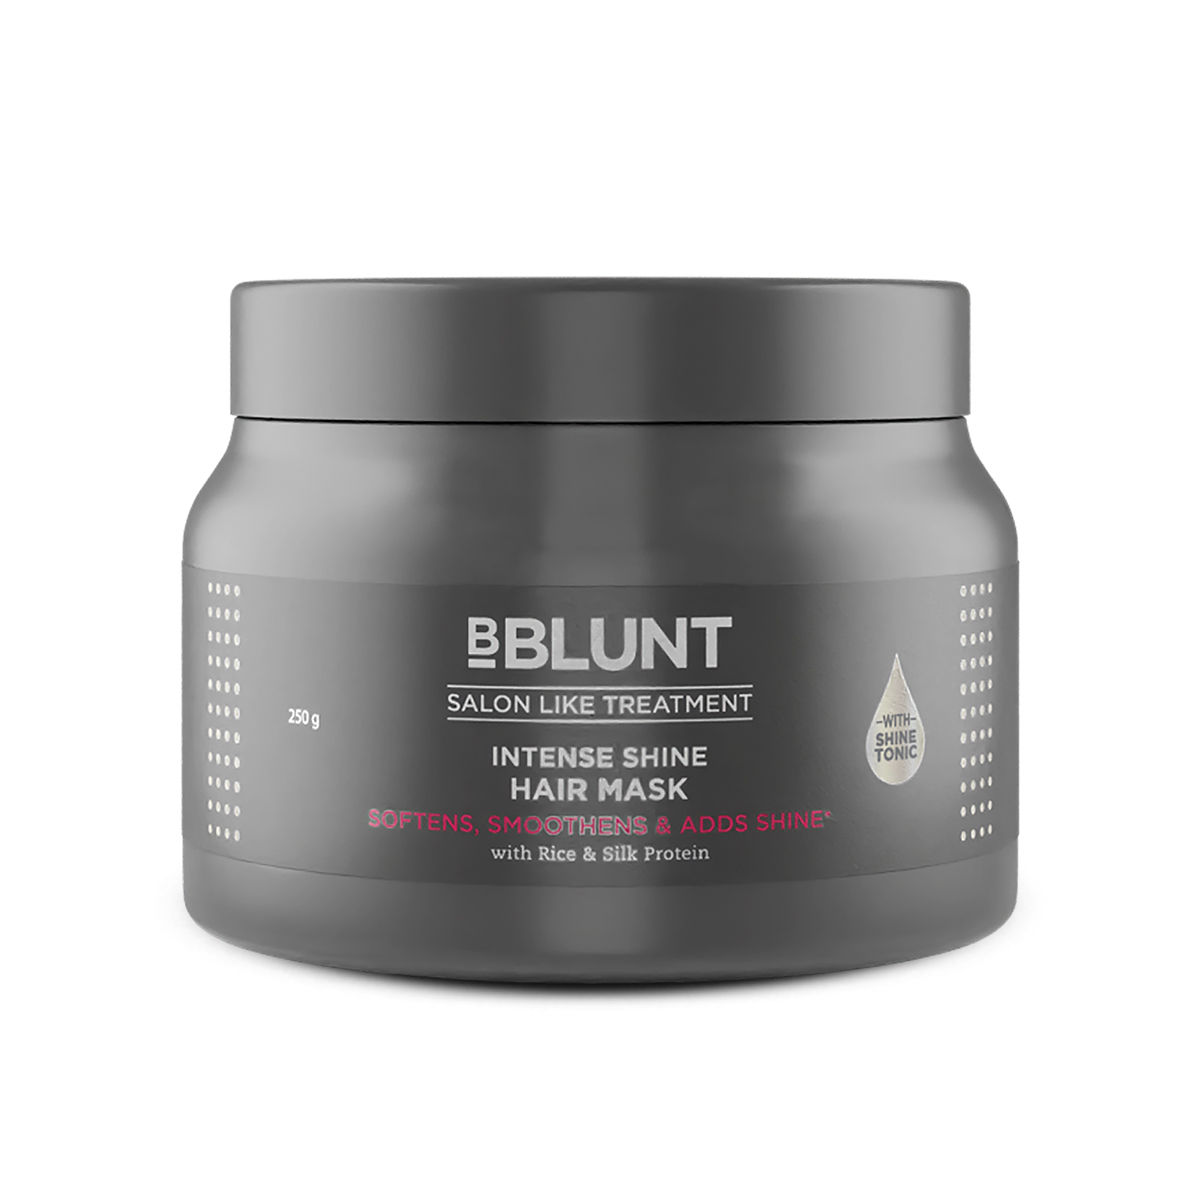 Bblunt Intense Shine Hair Mask With Rice And Silk Protein For Softer Smoother And Shinier Hair 250 G 1 Display 1684133268 Bb3f2e8a 